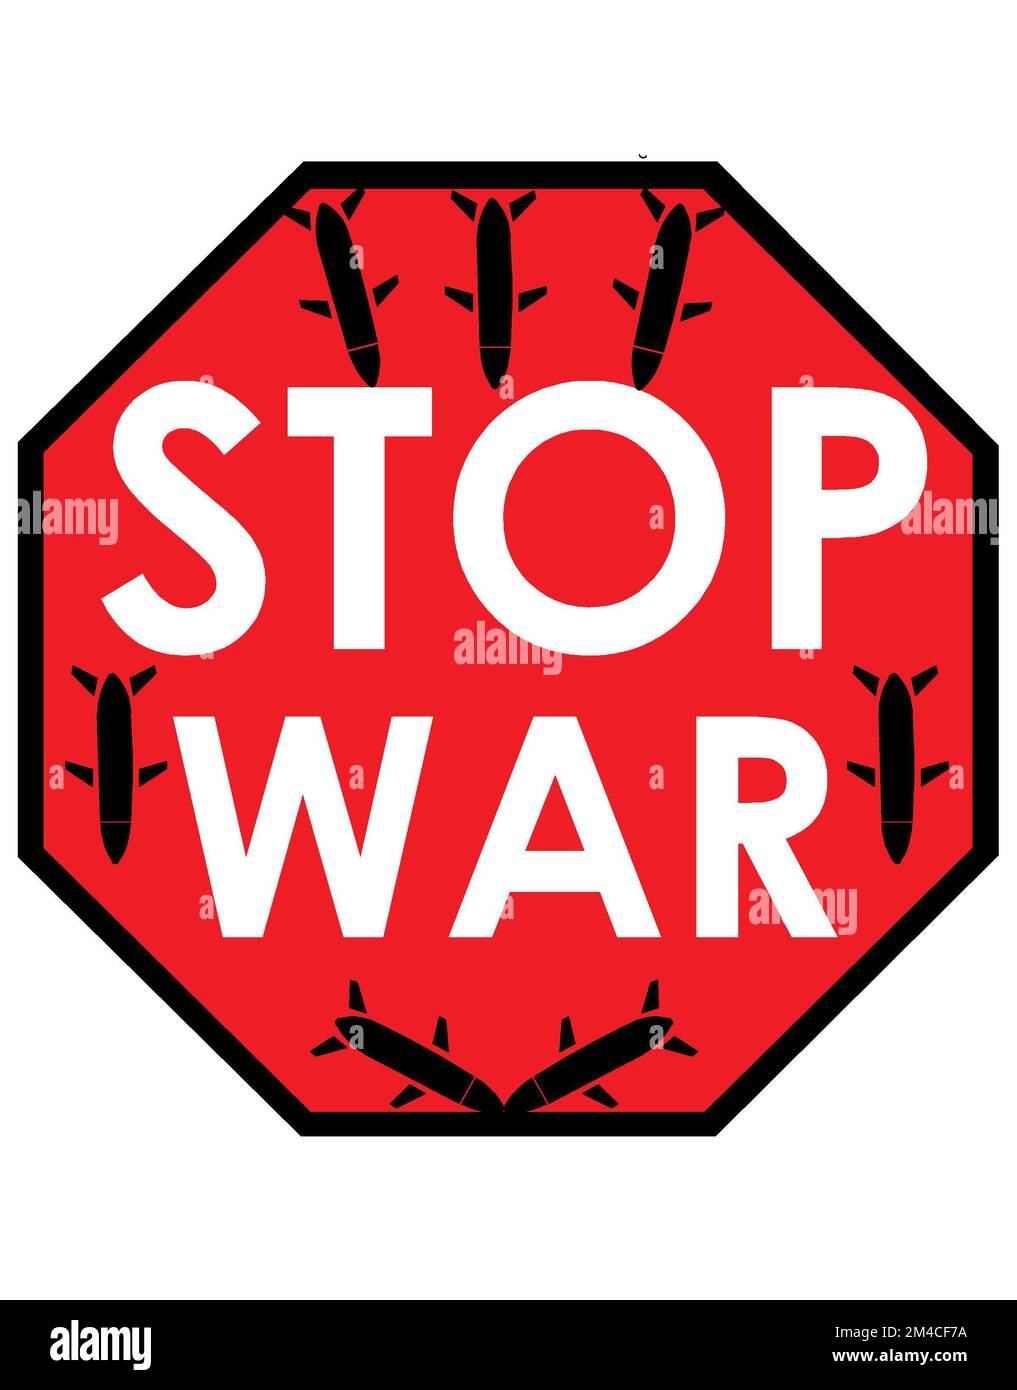 Stop war. Illustration of the red Stop road sign with the word war. No more war sign concept icon. Stop war icon. Stock Photo